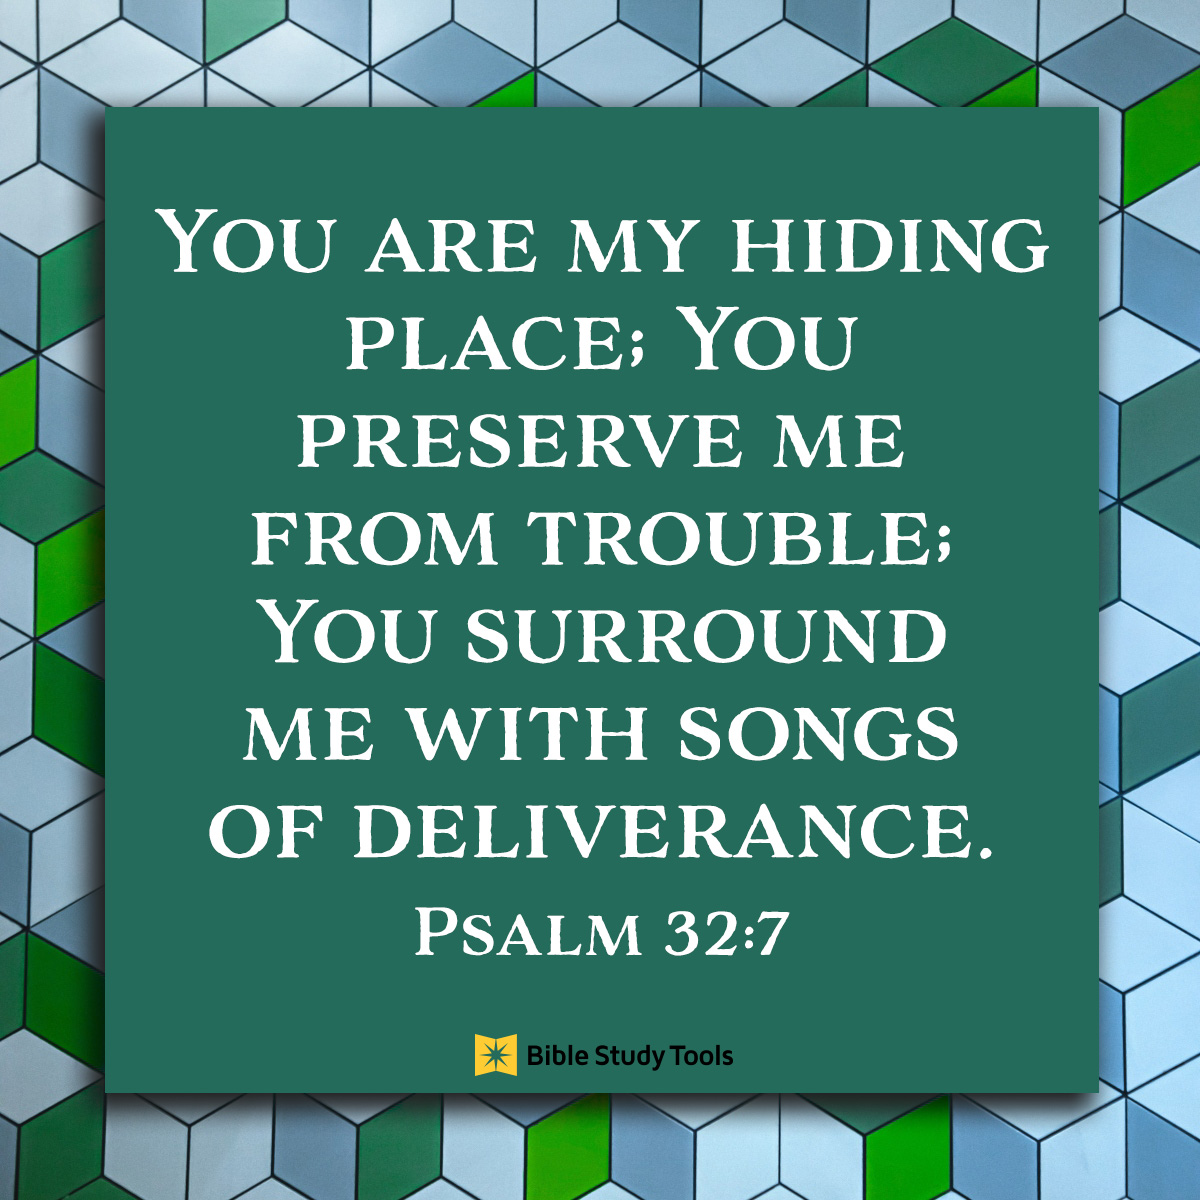 Psalm 32:7, inspirational images